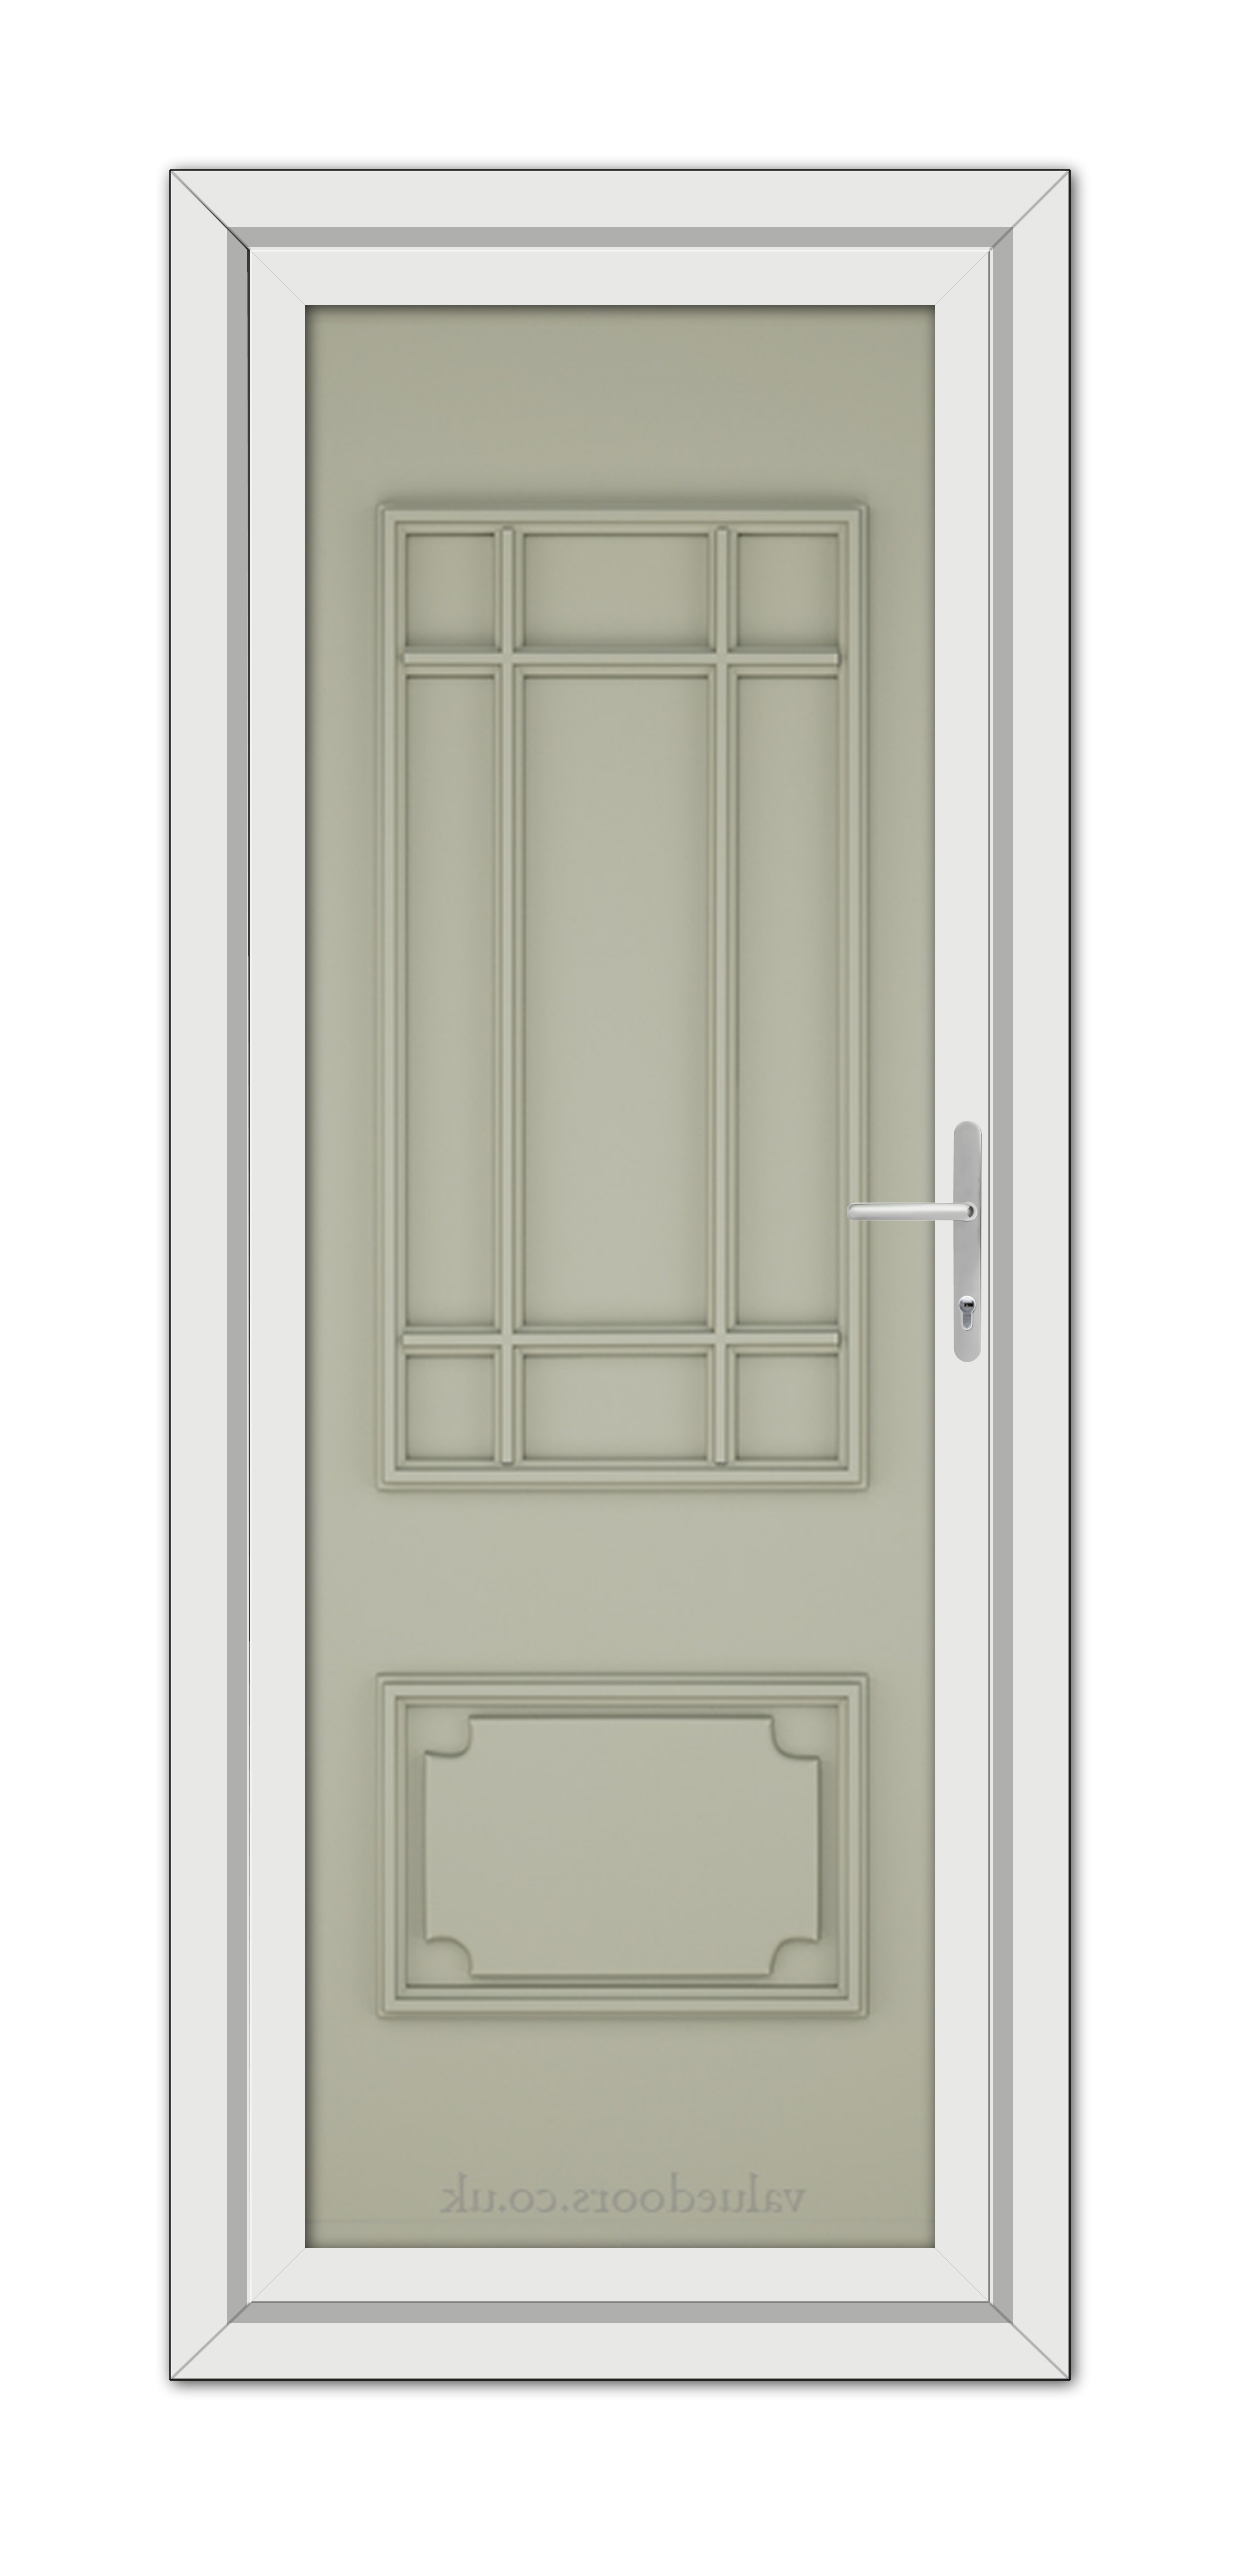 A vertical image of a closed, Agate Grey Winslow 1 Composite Door 48mm Timber Core with a white frame, featuring a window with grid design and a metal handle on the right.